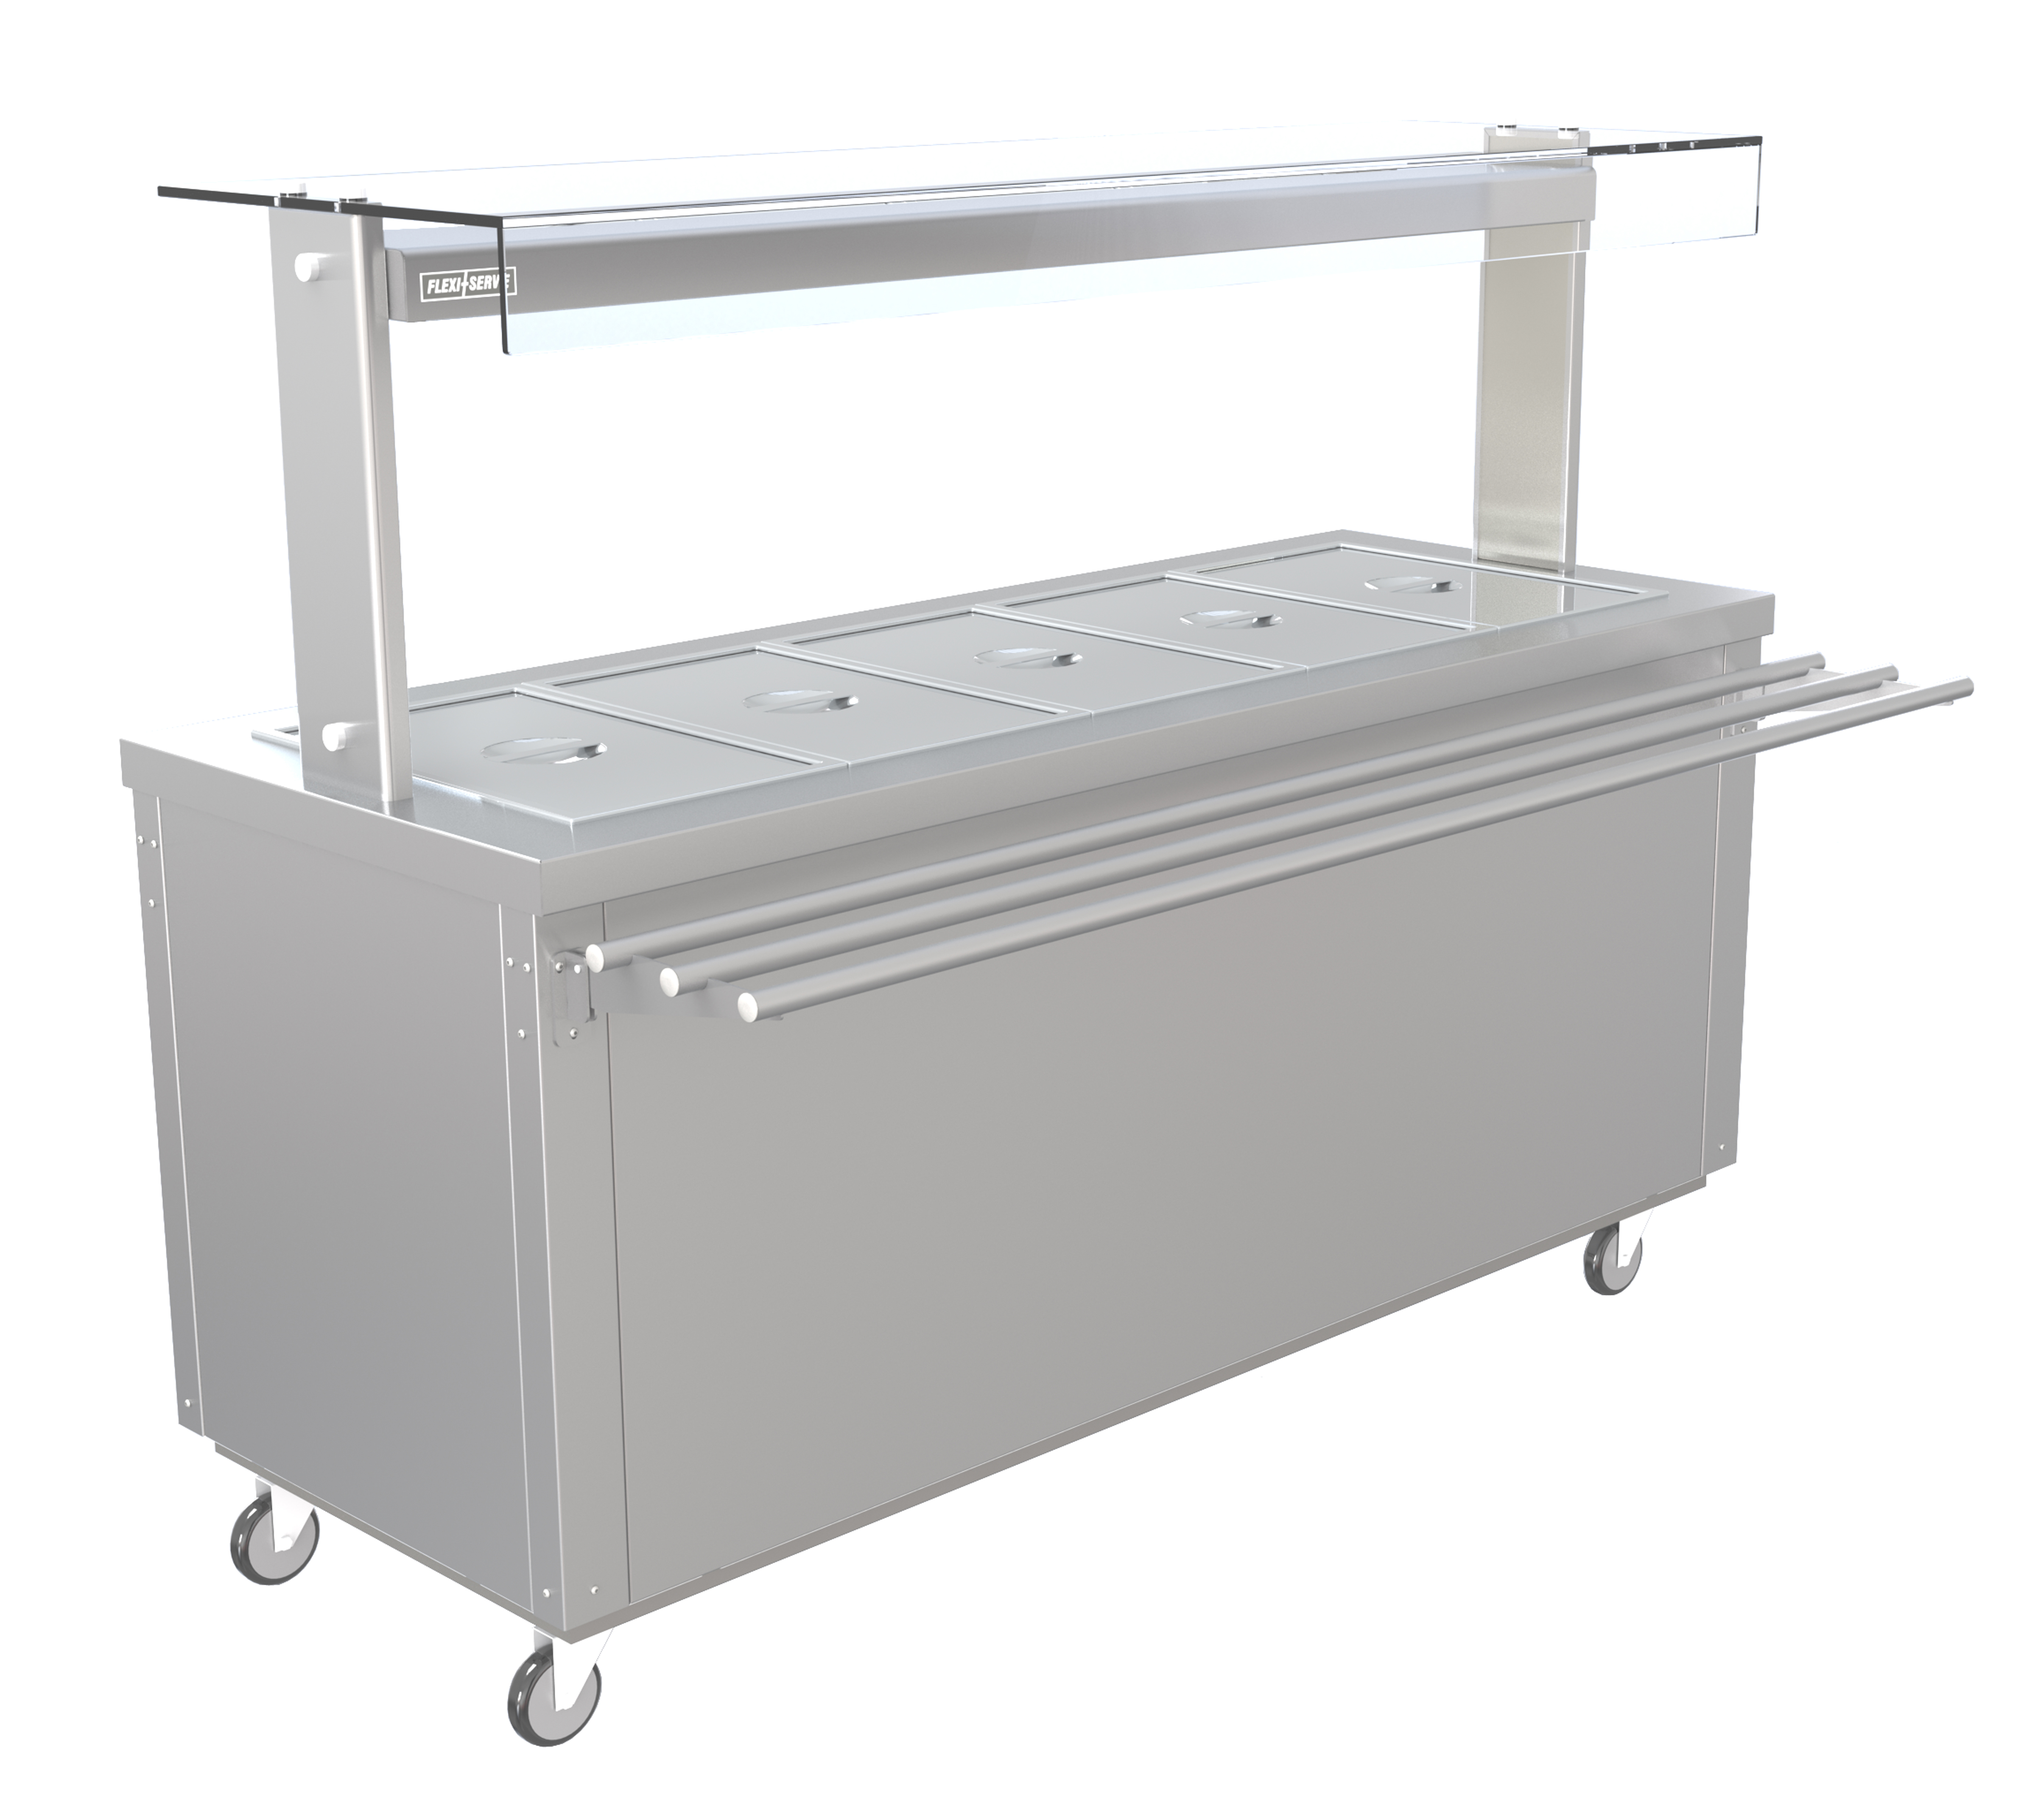 Parry FS-AW5 - Flexi Serv Ambient Cupboard